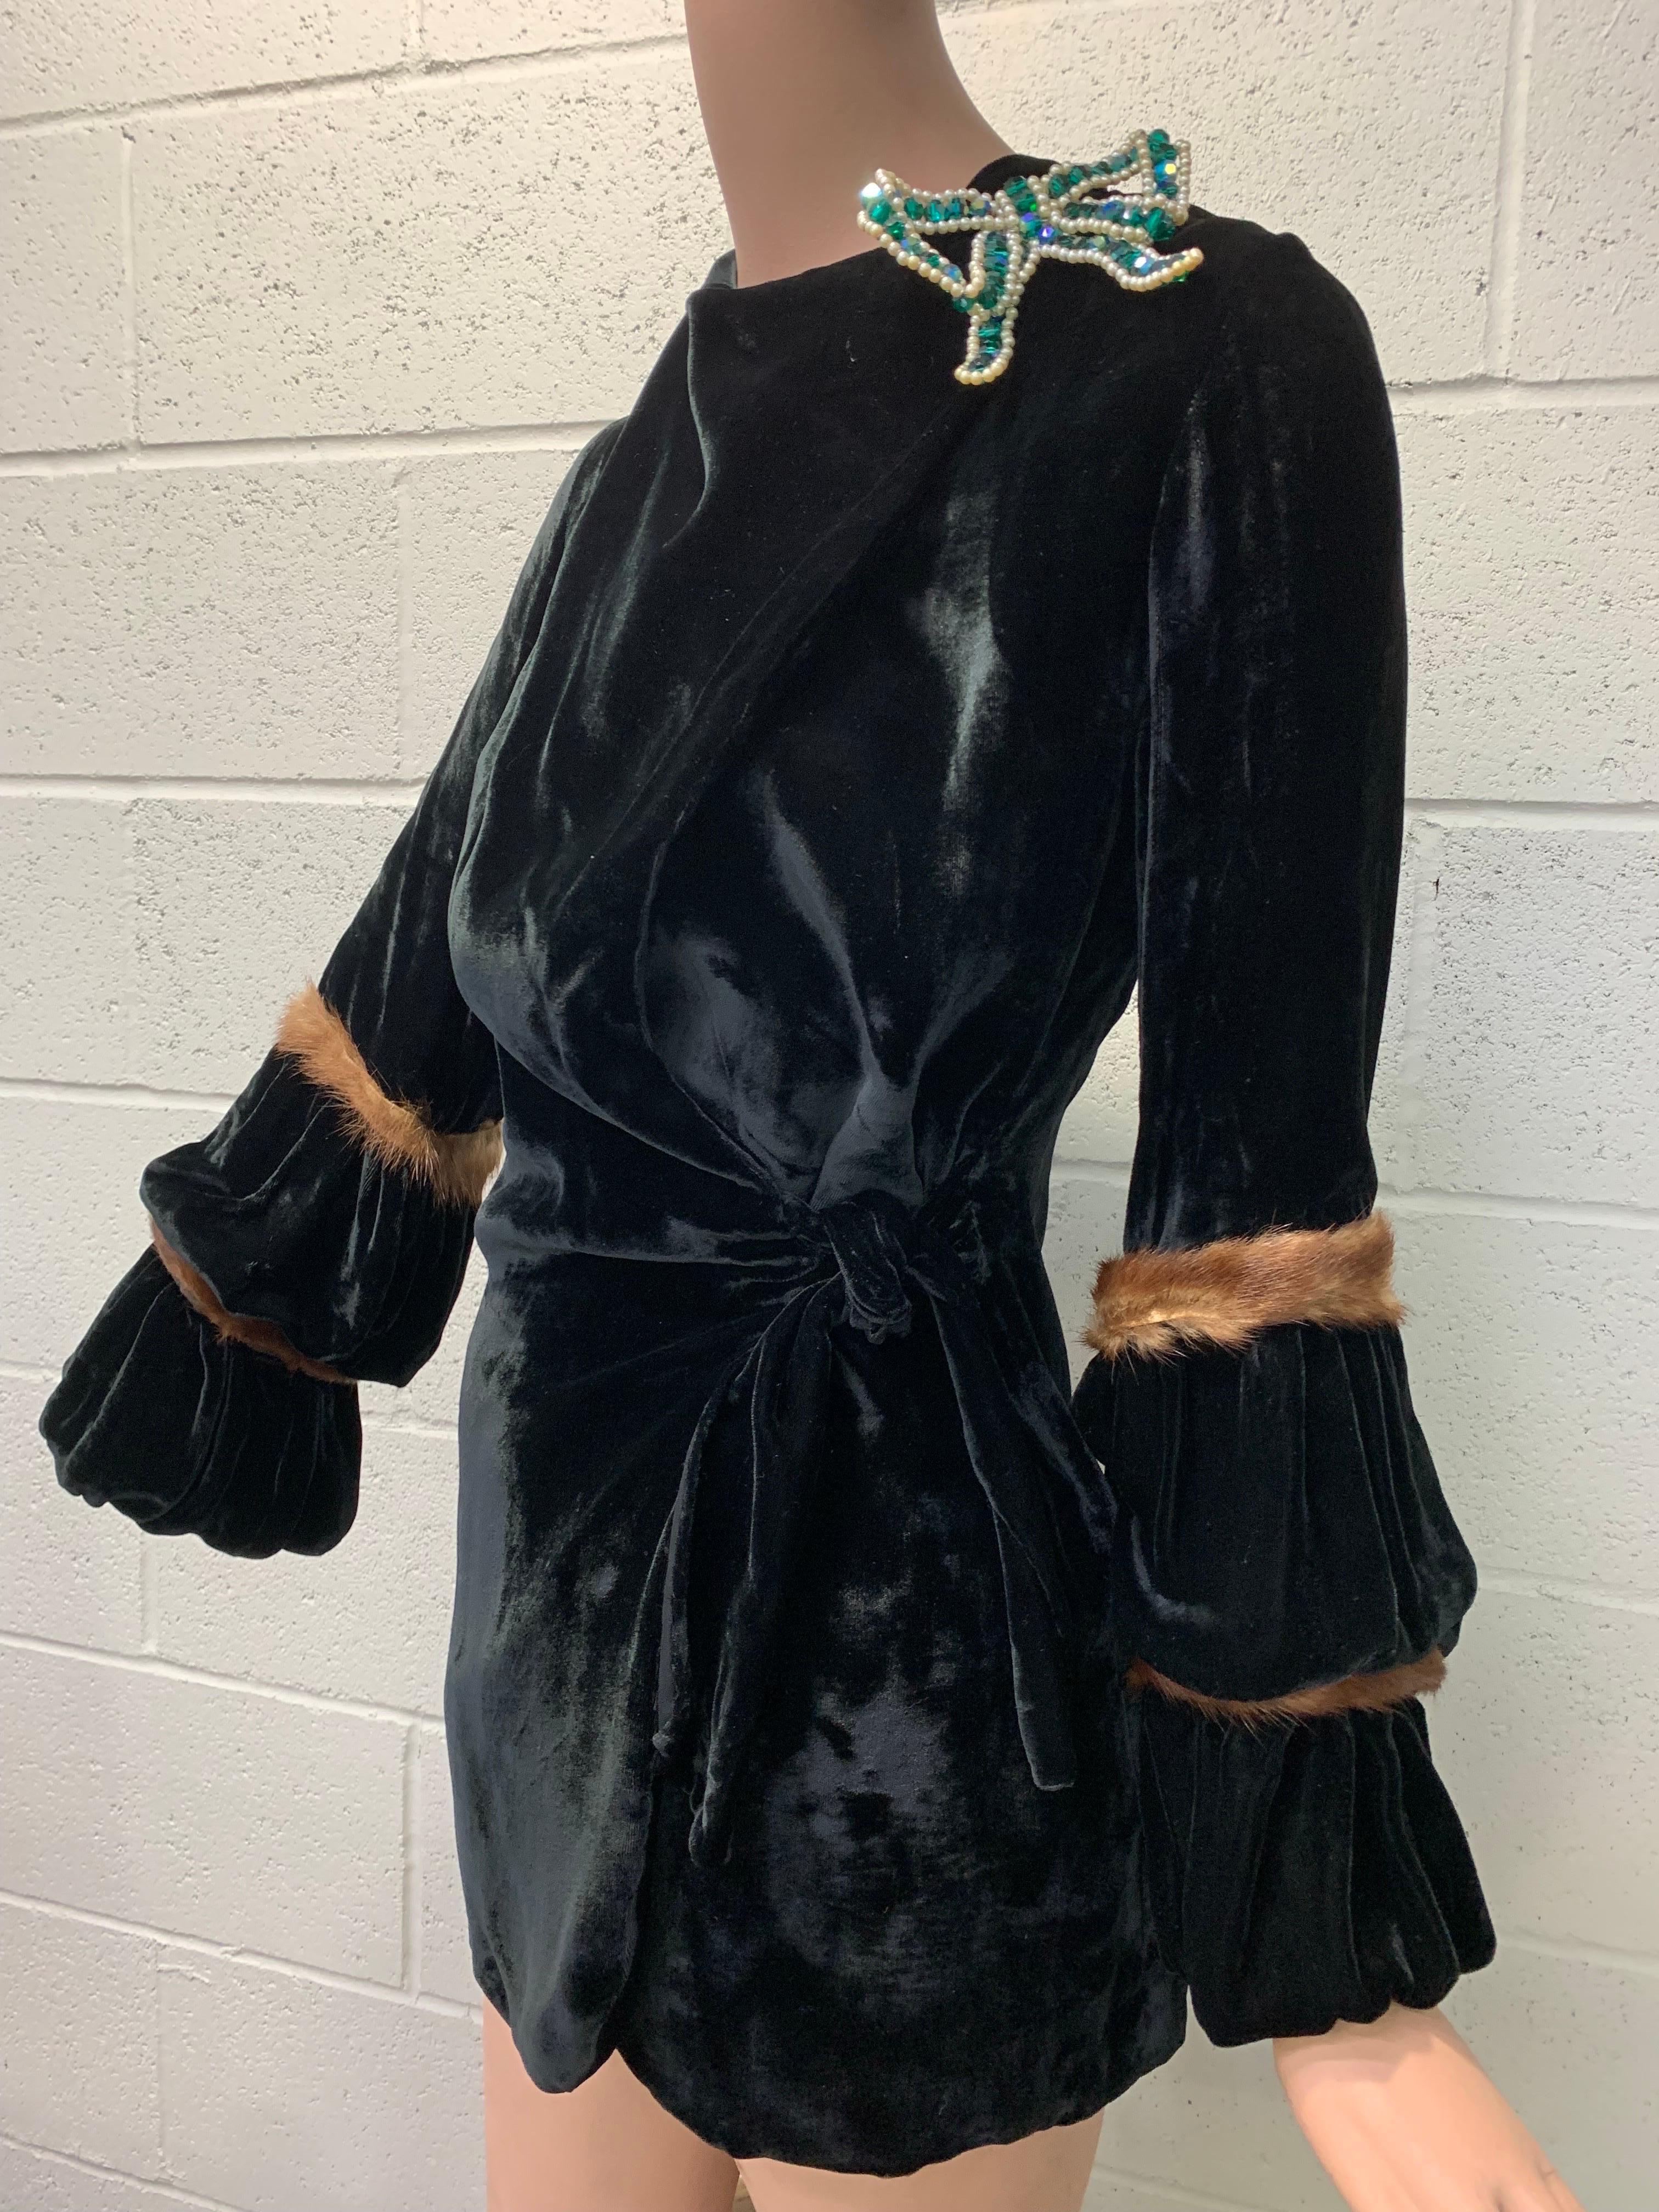 1930s Black Silk Velvet Wrap Jacket w Lantern Sleeves Trimmed in Mink w Brooch:  Fully lined in ivory silk crepe, this stunning evening jacket with a high optional button closure at neck, is from The Gown Shop - Meier and Frank Co. Emerald green